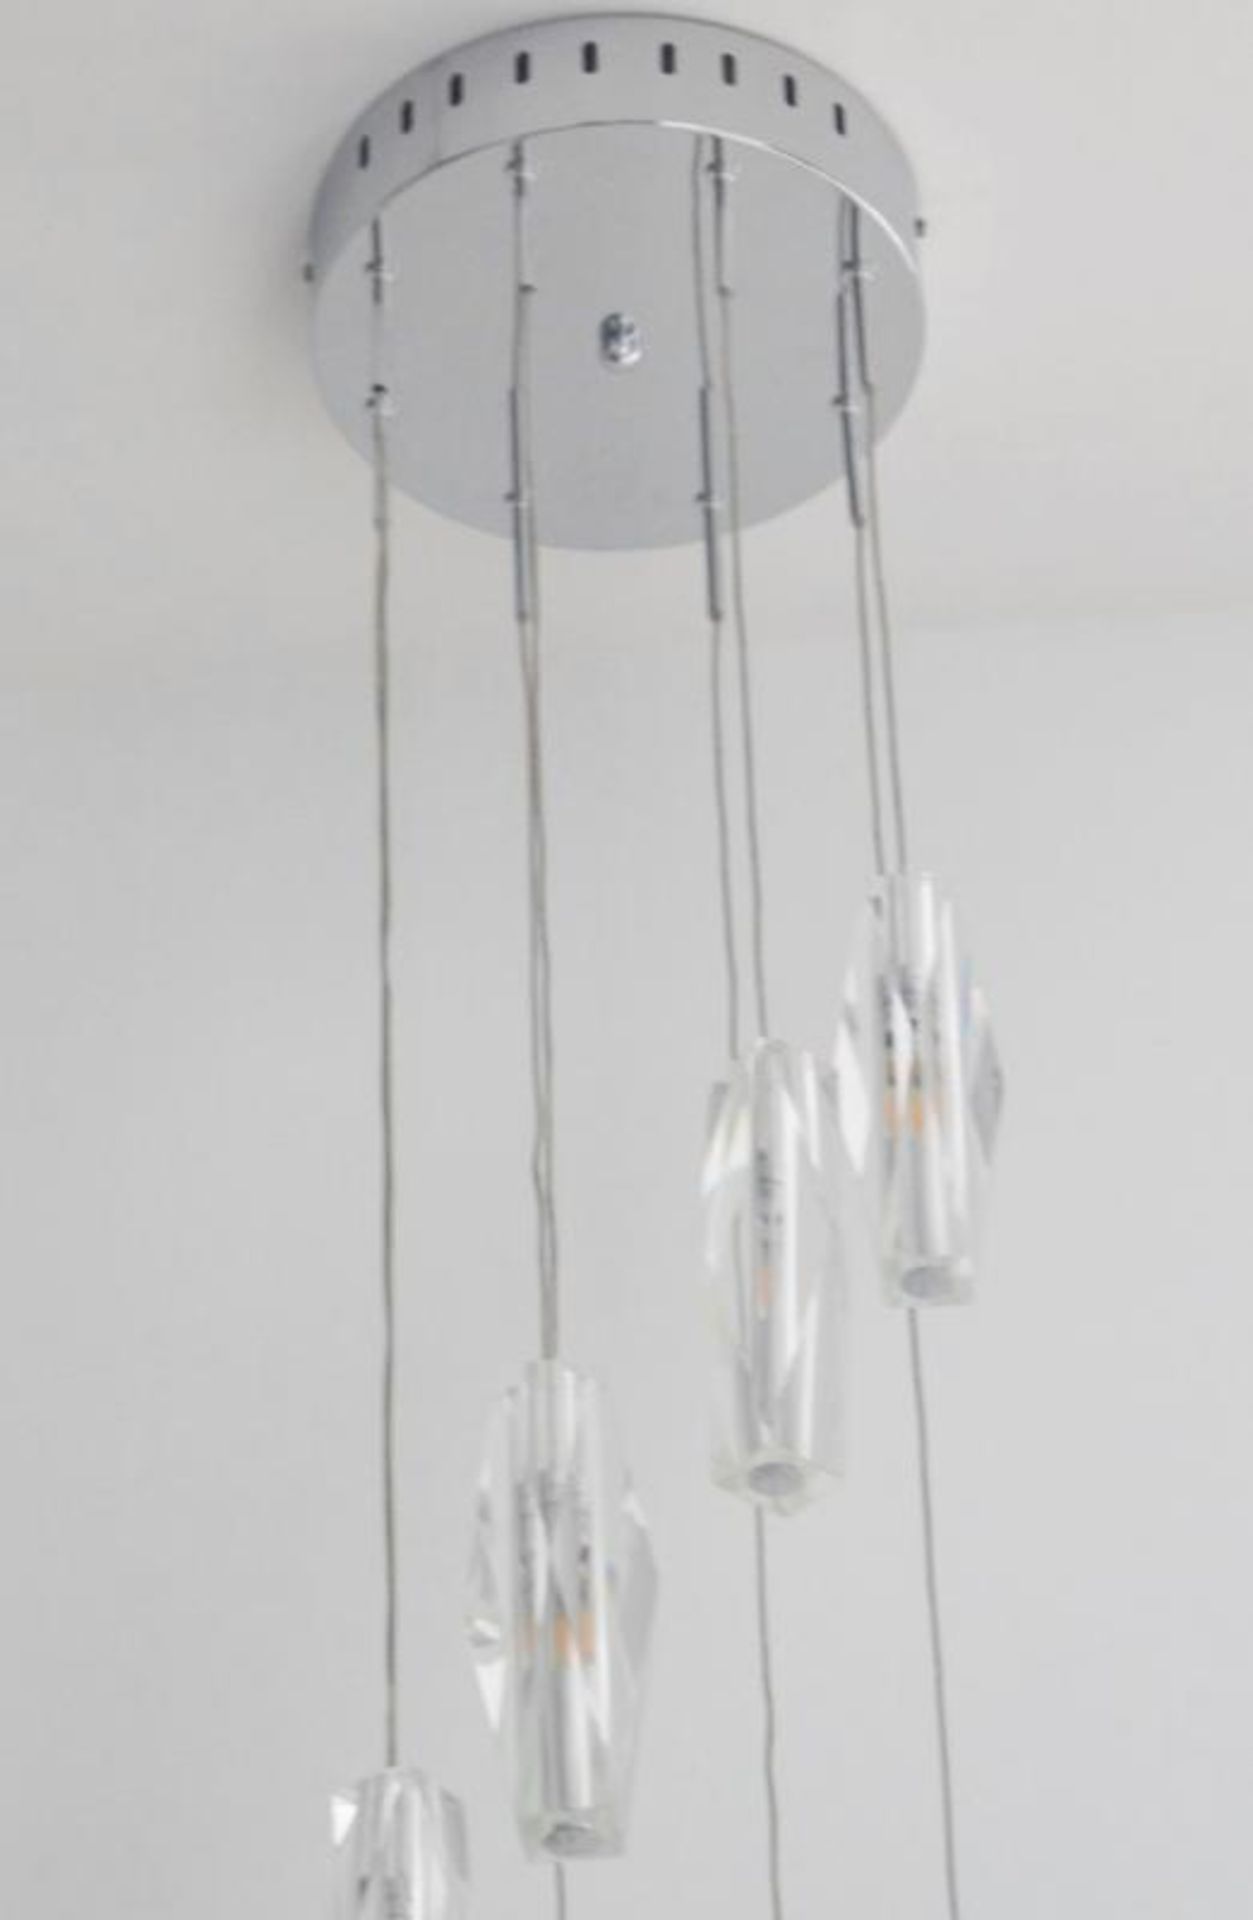 1 x Sculptured Ice Chrome 8-Light Dingle Dangle Pendant With Crystal Glass - Ex Display Stock - CL29 - Image 2 of 3